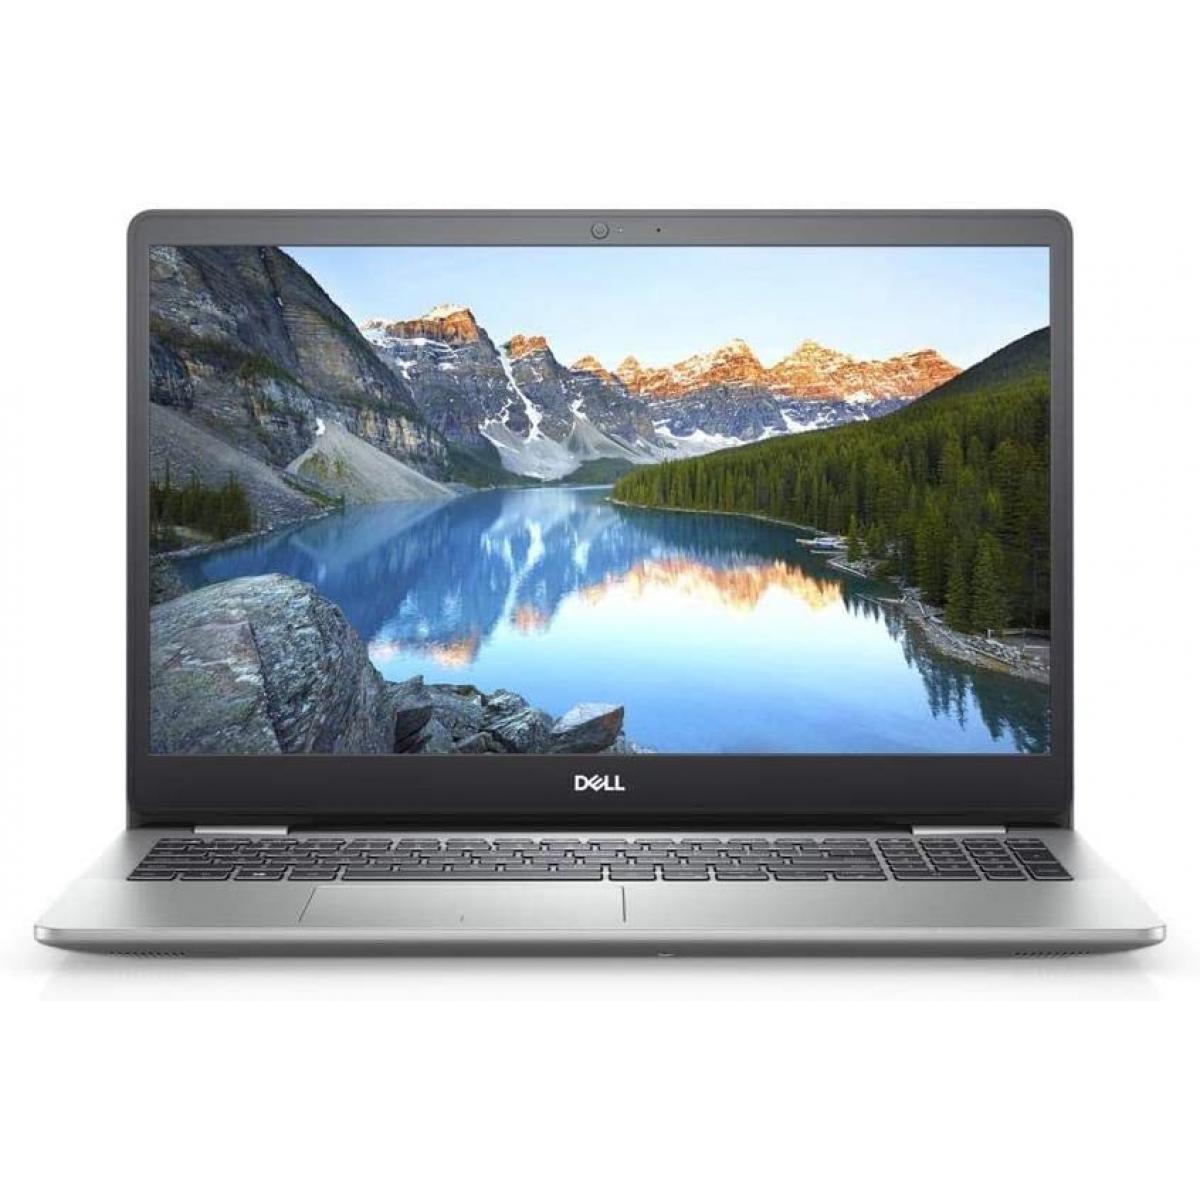 Dell Inspiron 14 5000 (5490) Specs, Battery, Price & Graphics